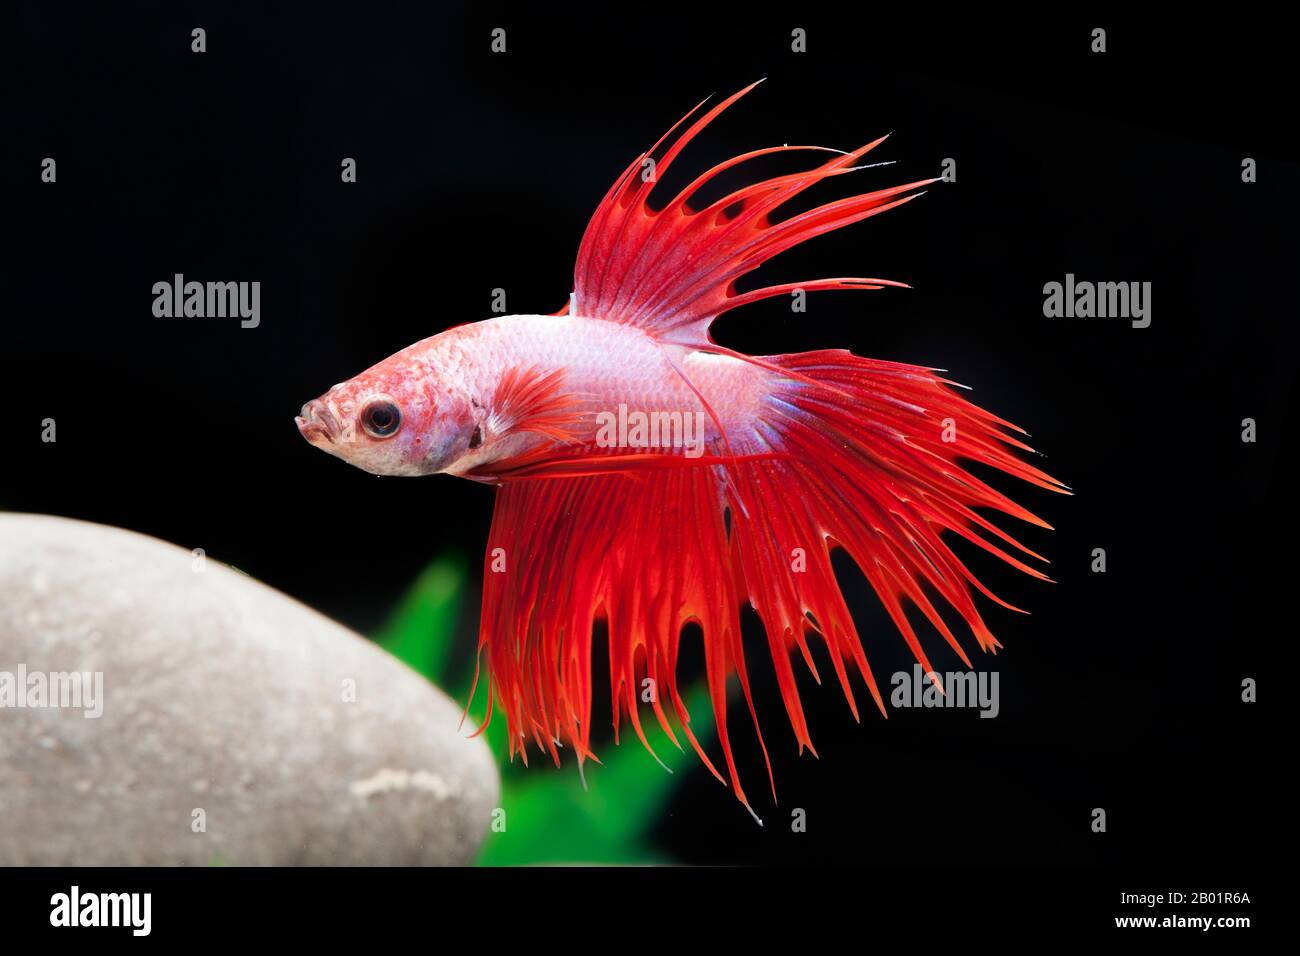 Siamese luttant contre le poisson, Siamese fighter (Betta Splendens Crowntail Green Dragon), Crowntail Green Dragon Banque D'Images